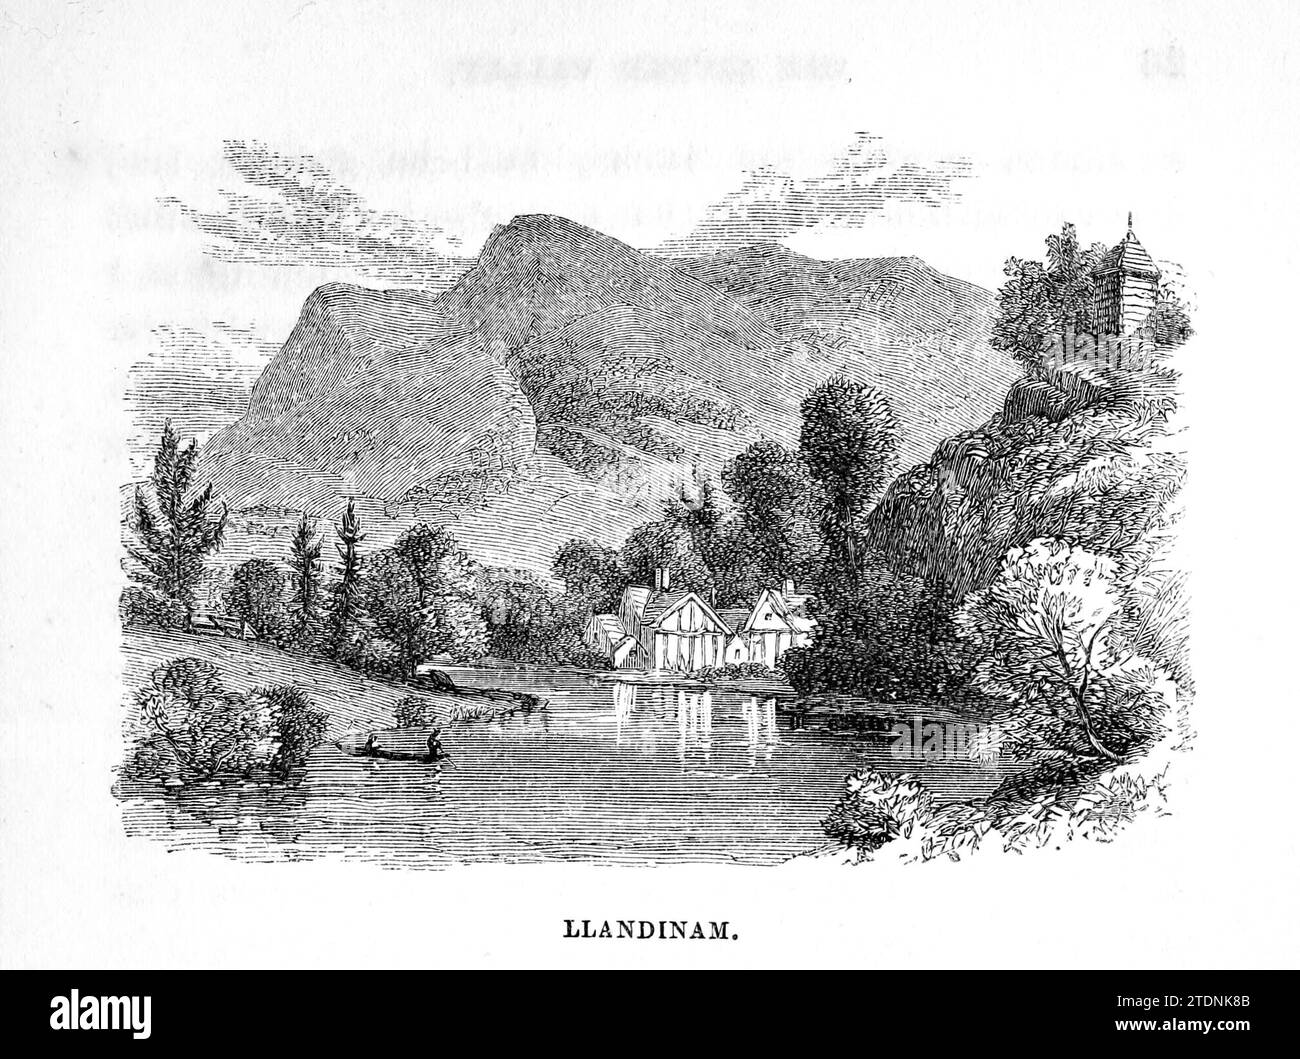 Llandinam is a village and community in Montgomeryshire, Powys, central Wales, from the book The Severn valley: a series of sketches, descriptive and pictorial, of the course of the Severn: containing notices of its topographical, industrial, and geological features; with glances at its historical and legendary associations by Randall, John, 1810-1910 Publication date 1862 Publisher J. S. Virtue Stock Photo